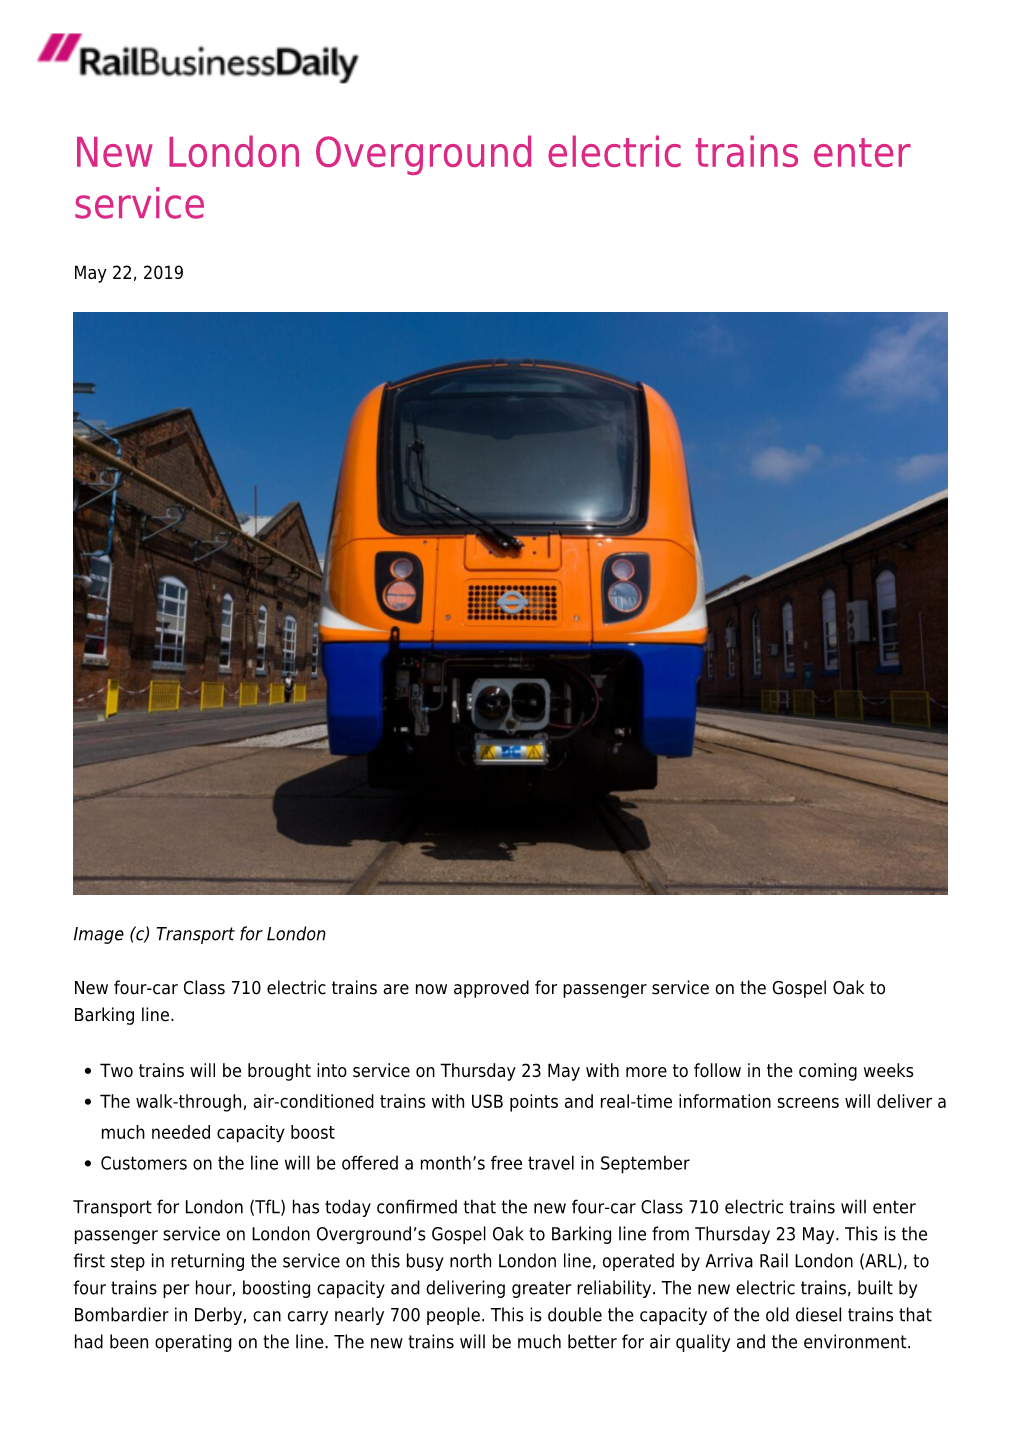 New London Overground Electric Trains Enter Service